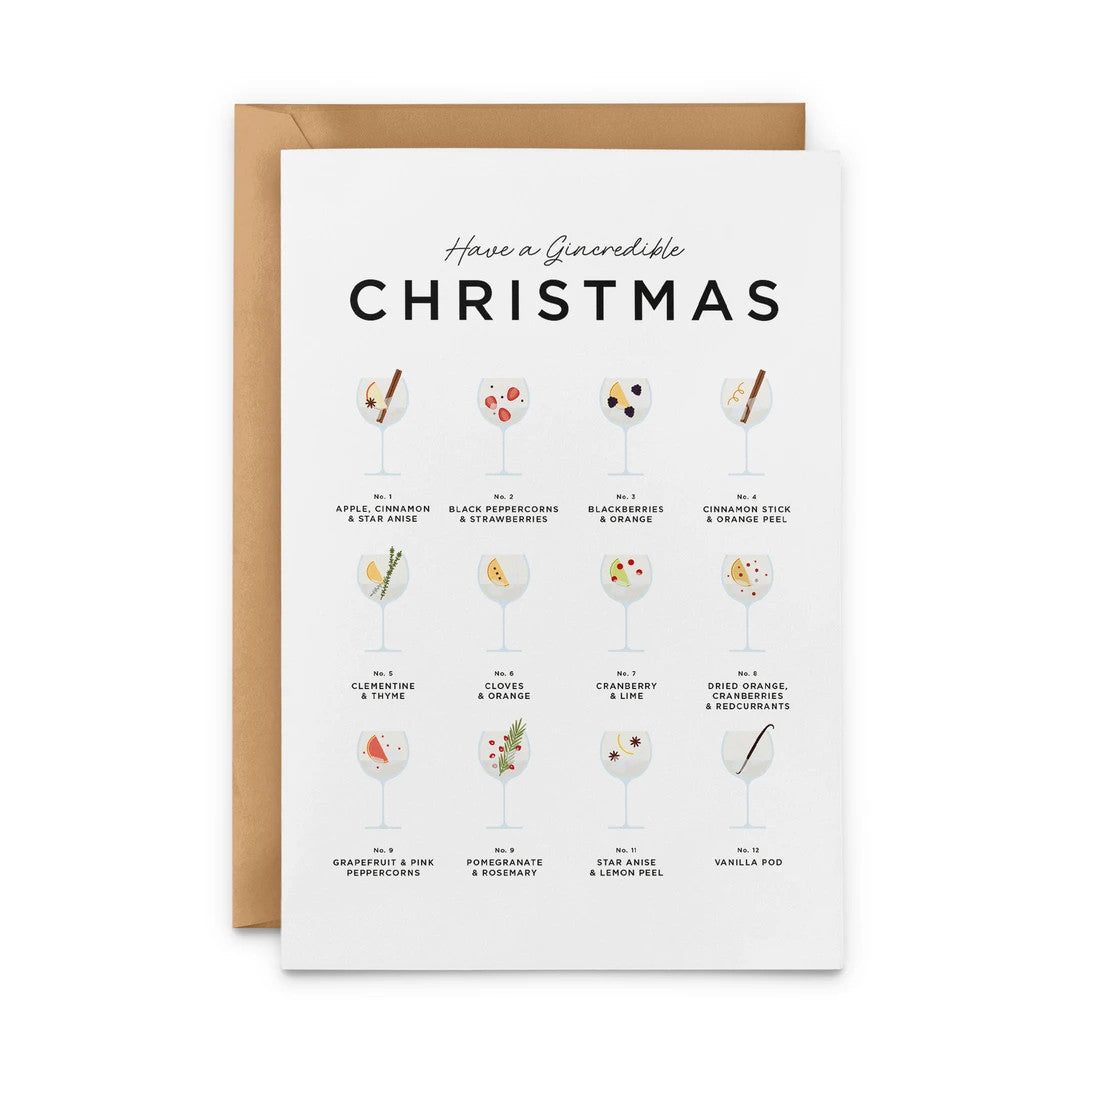 Have a Gincredible Christmas Card from Everlong Print Co. Made in England